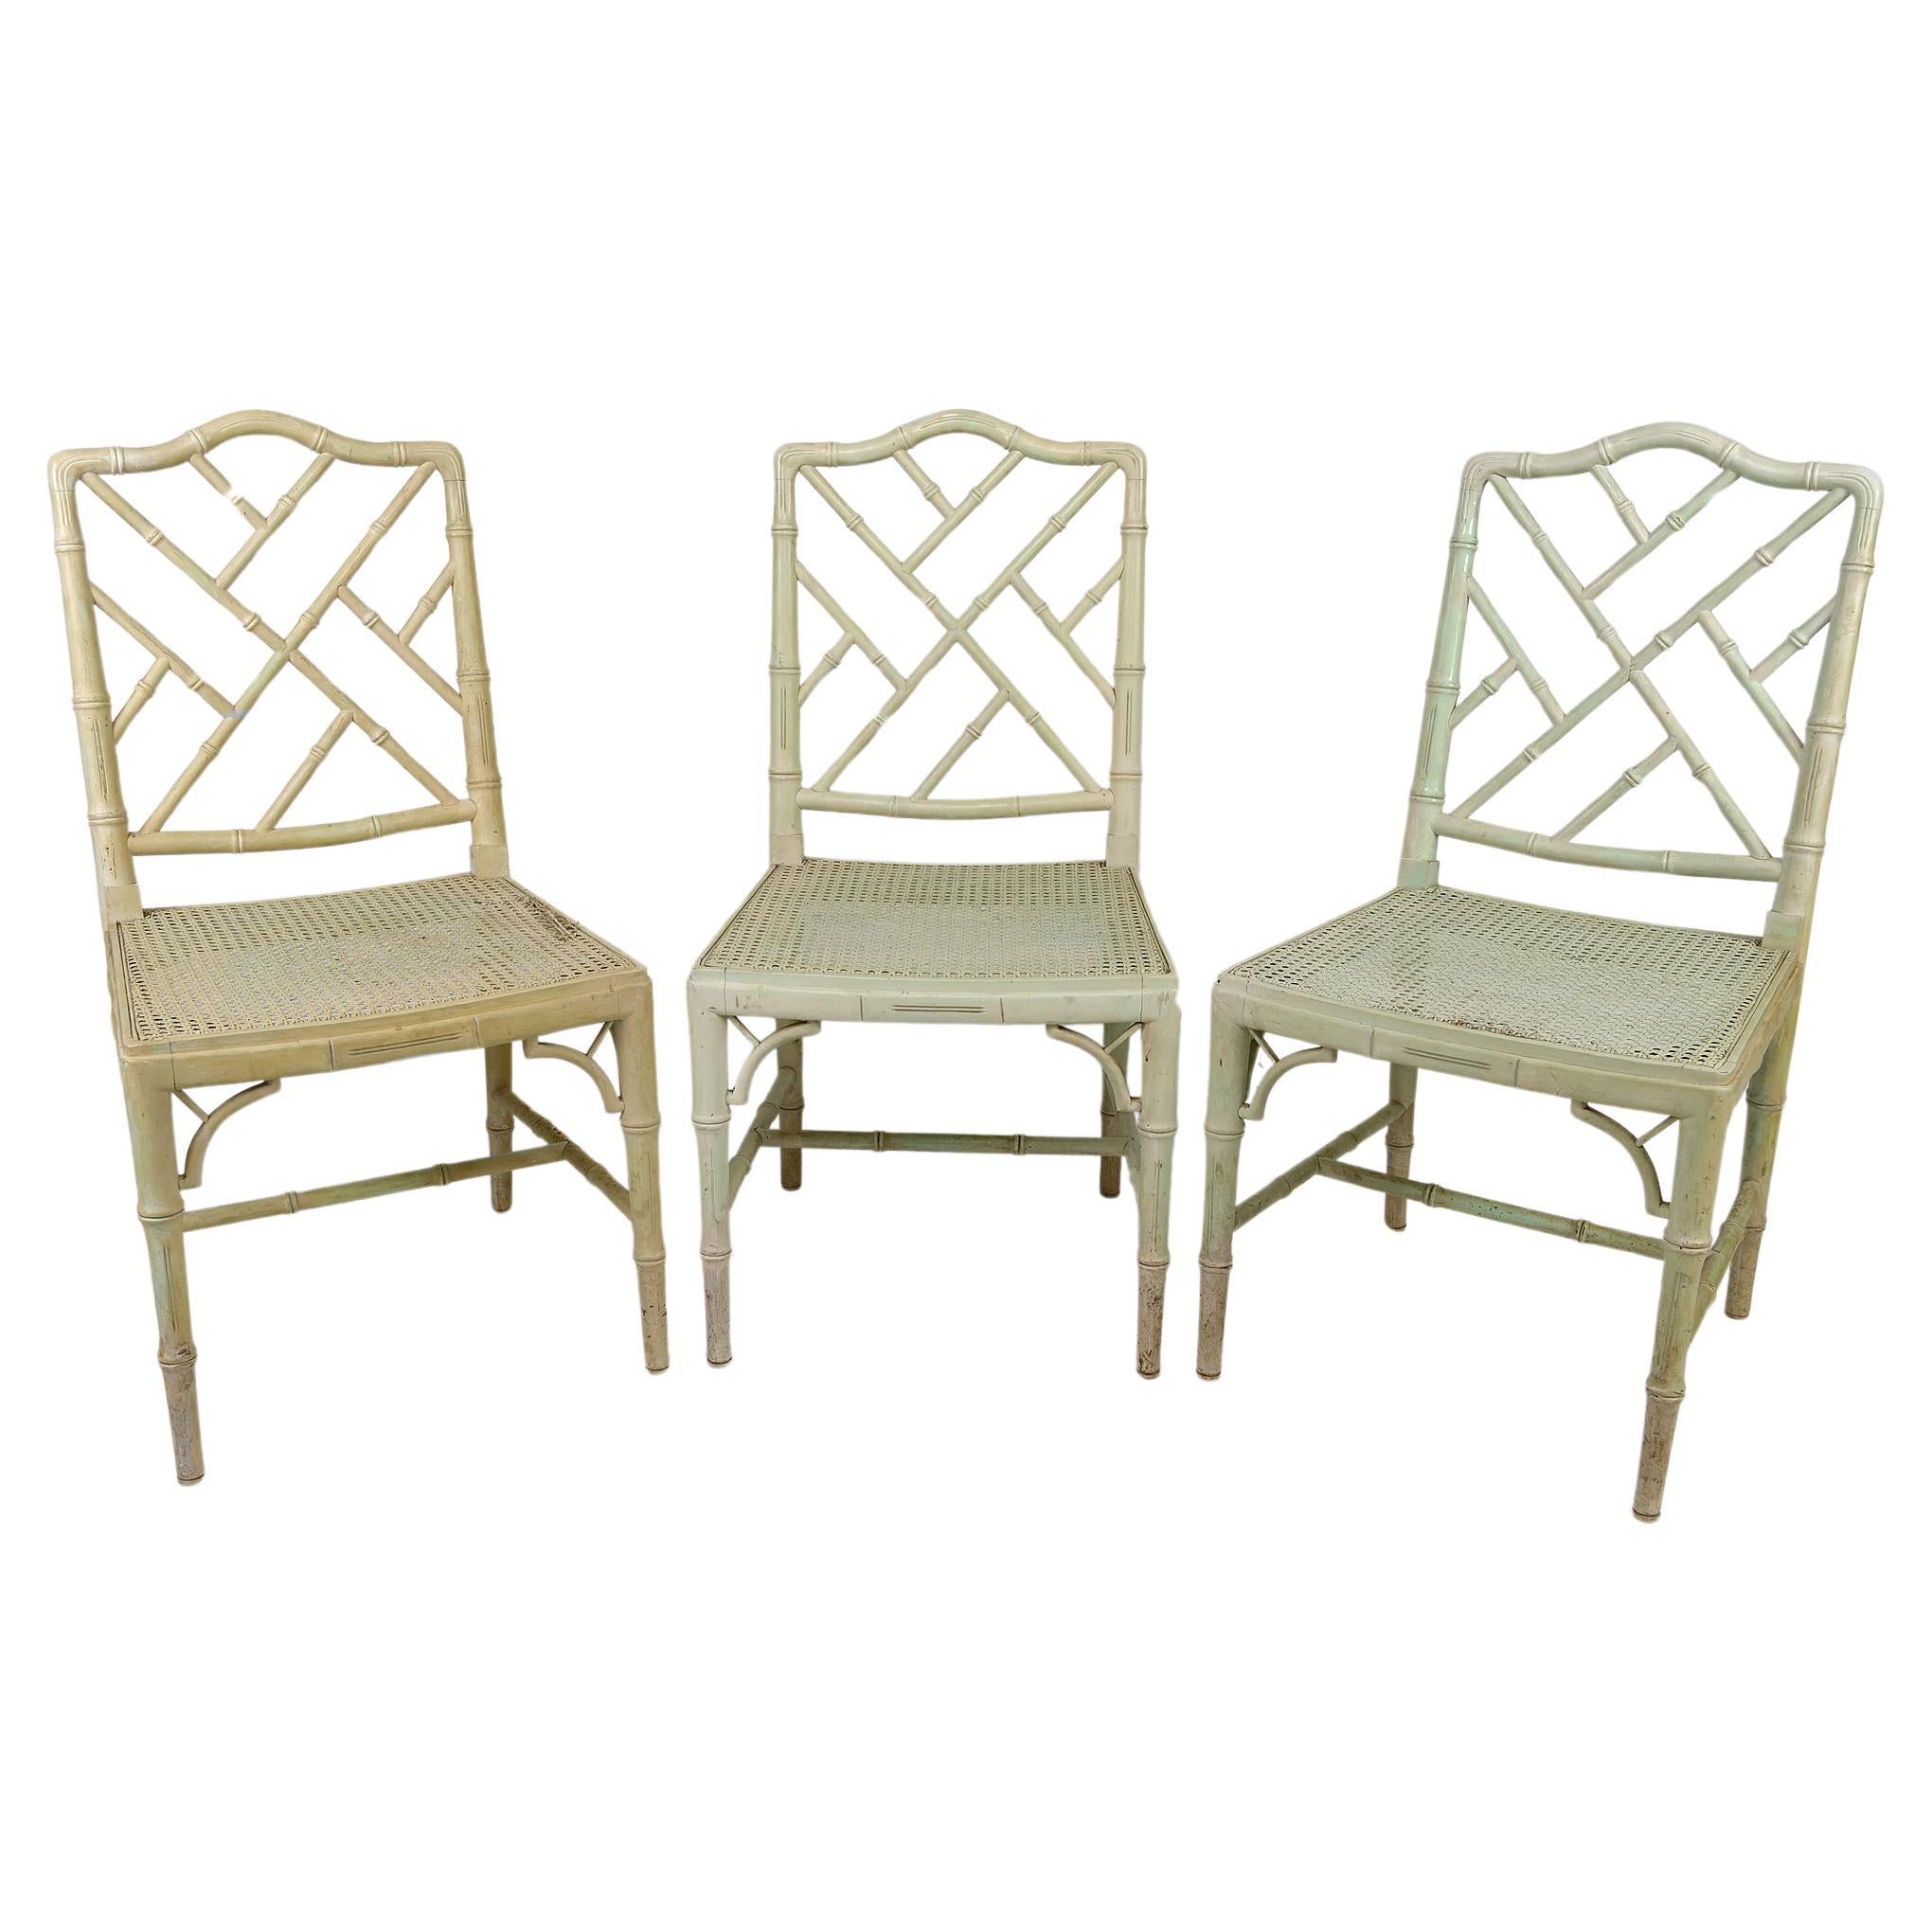 Set of 3 Japonisme style / Aesthetic Movement chairs, France, circa 1900